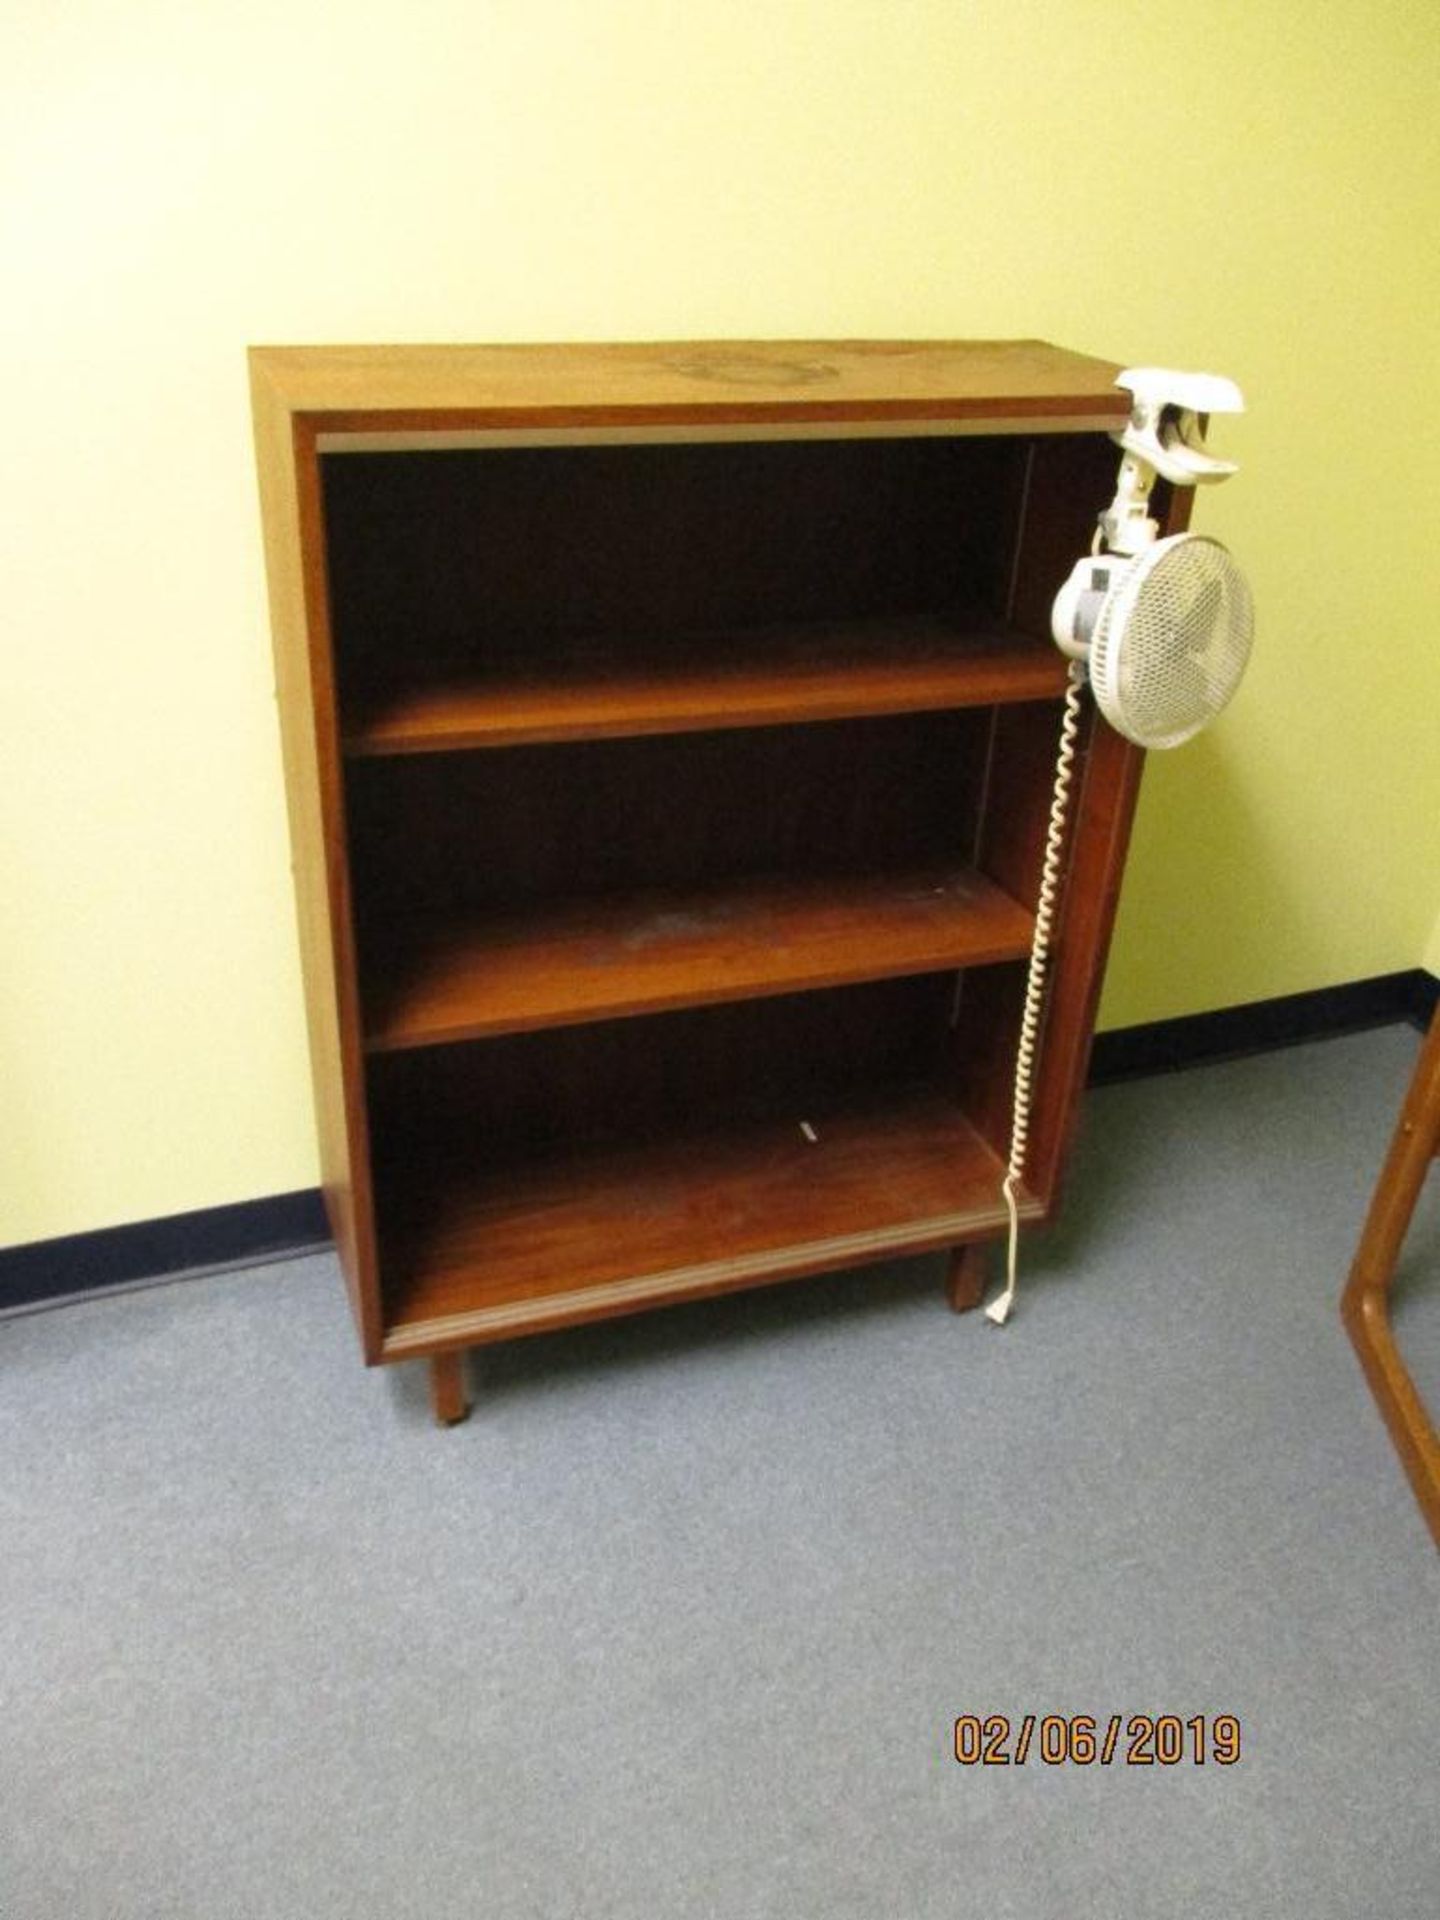 Two Tables, One File Cabinet, One Shelf No Contents - Image 2 of 2